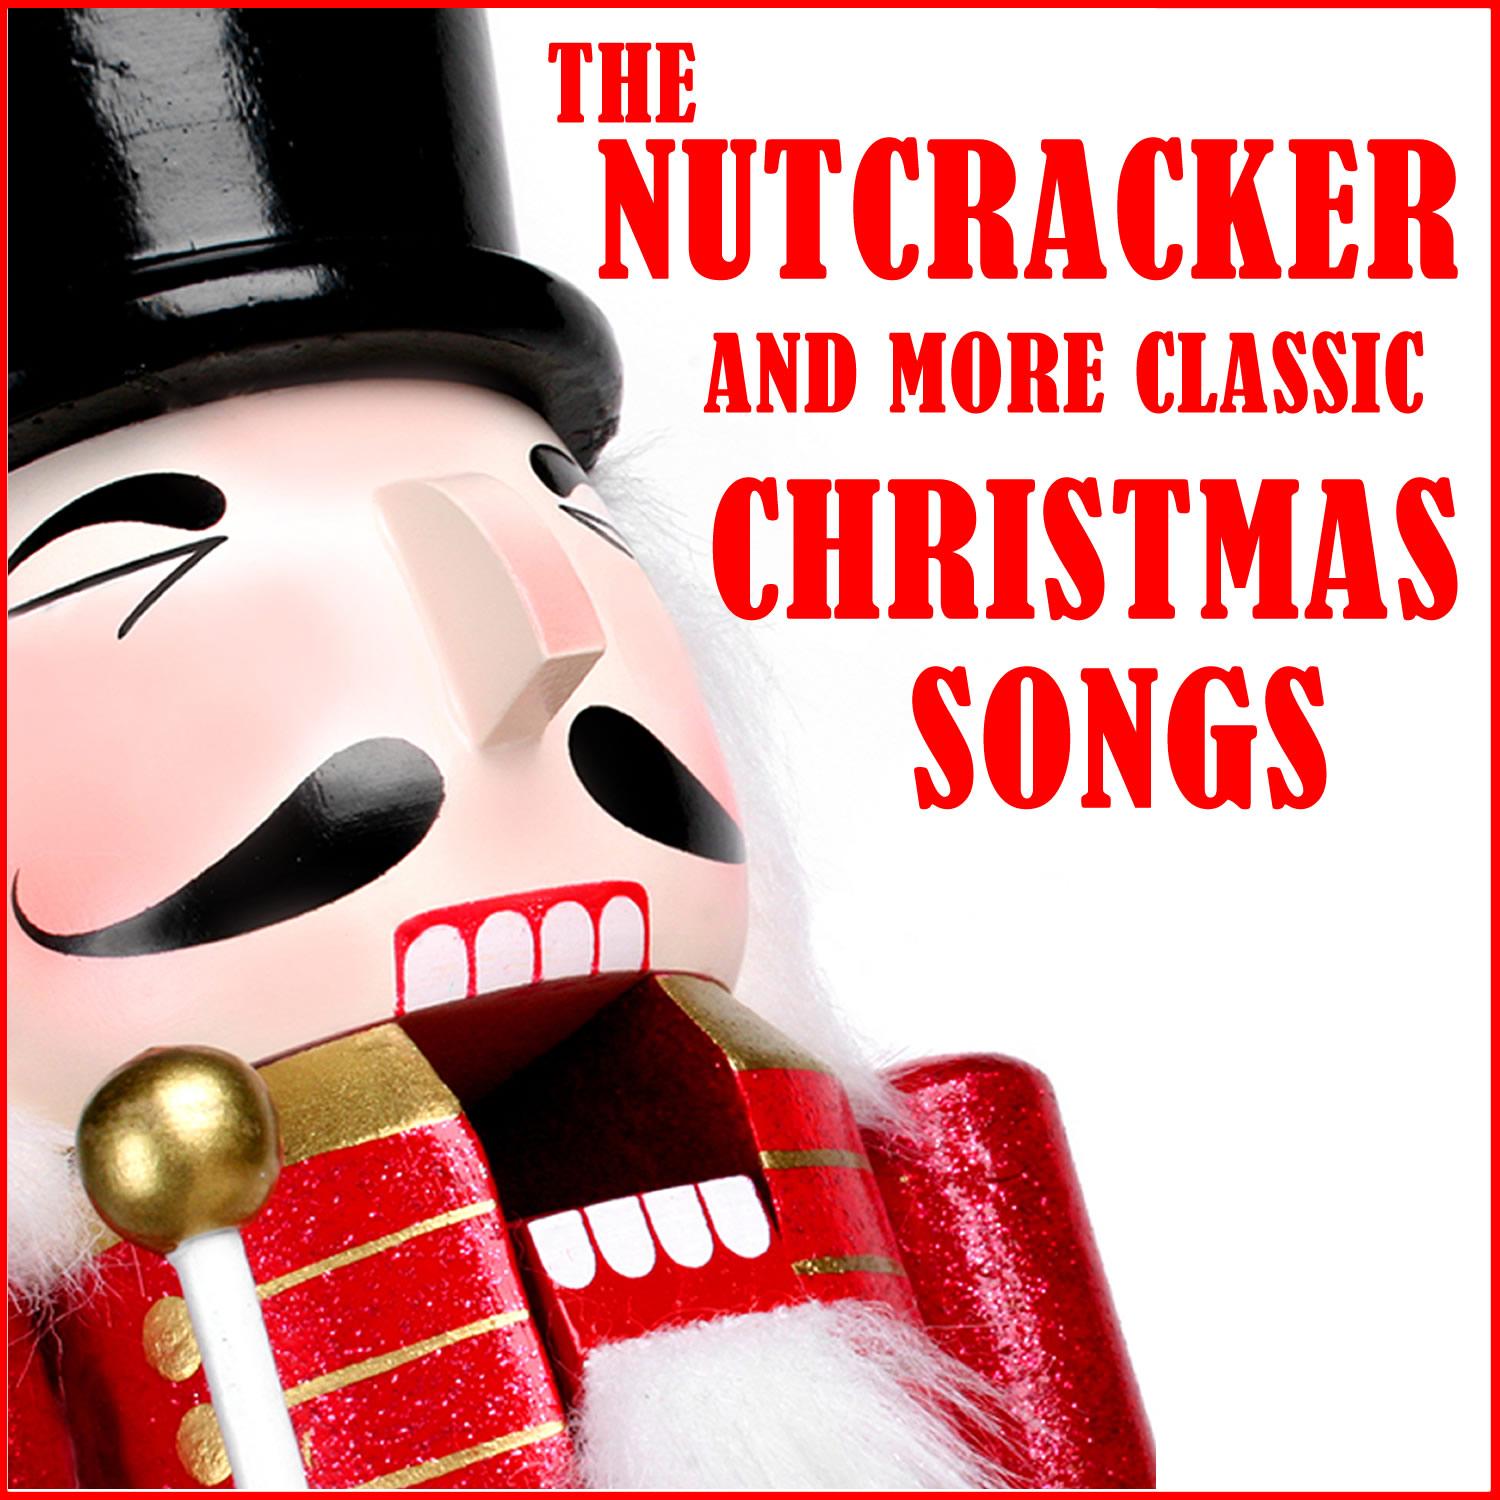 The Nutcracker and More Classic Christmas Songs